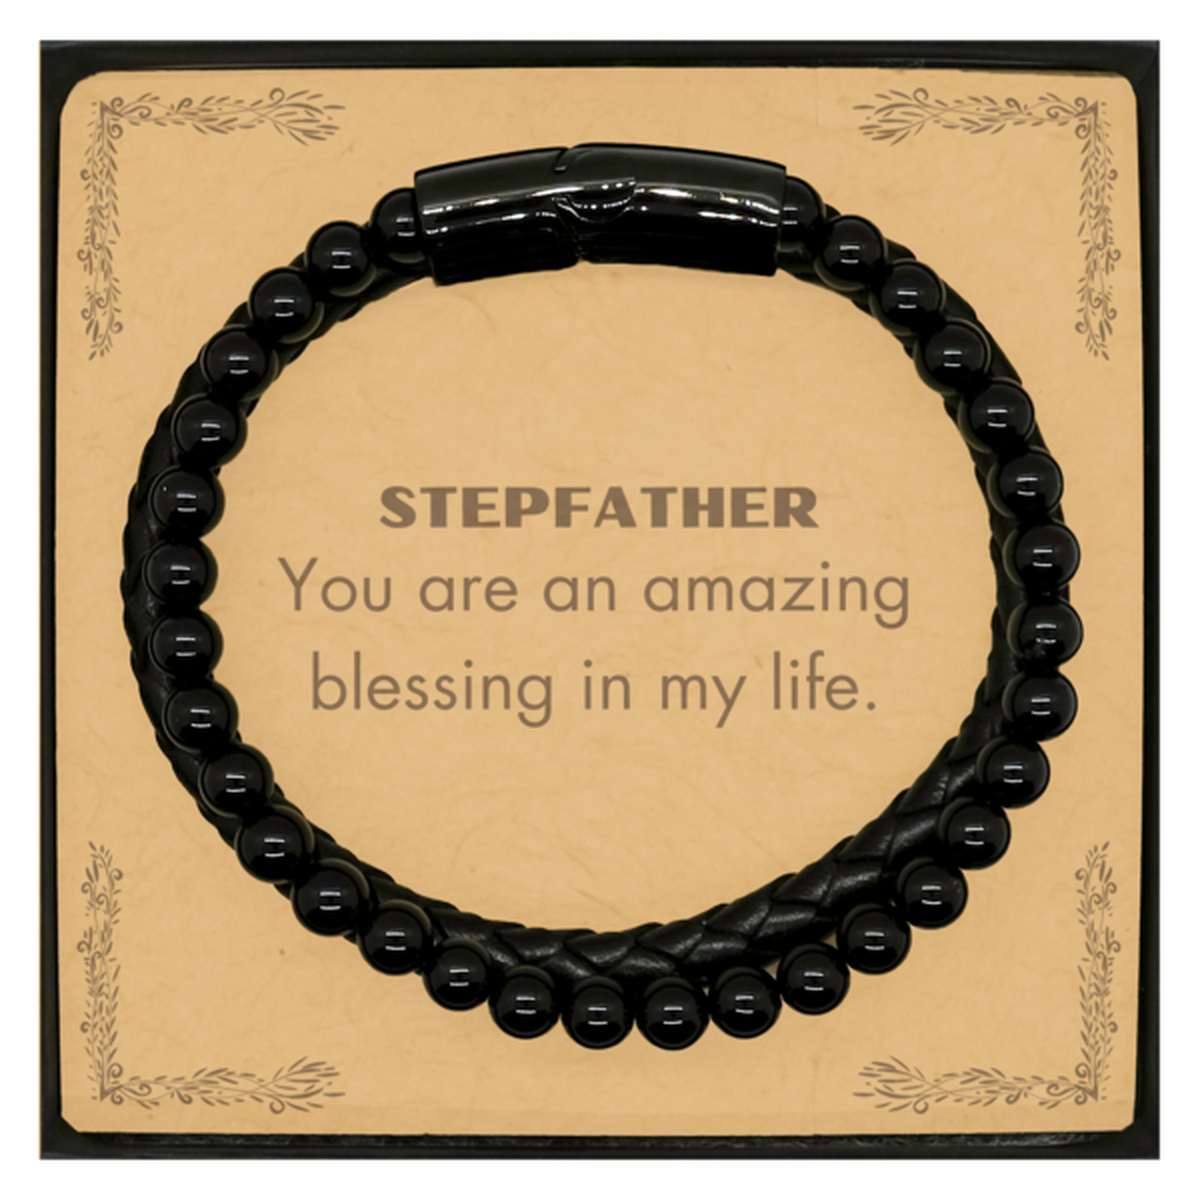 Stepfather Stone Leather Bracelets, You are an amazing blessing in my life, Thank You Gifts For Stepfather, Inspirational Birthday Christmas Unique Gifts For Stepfather